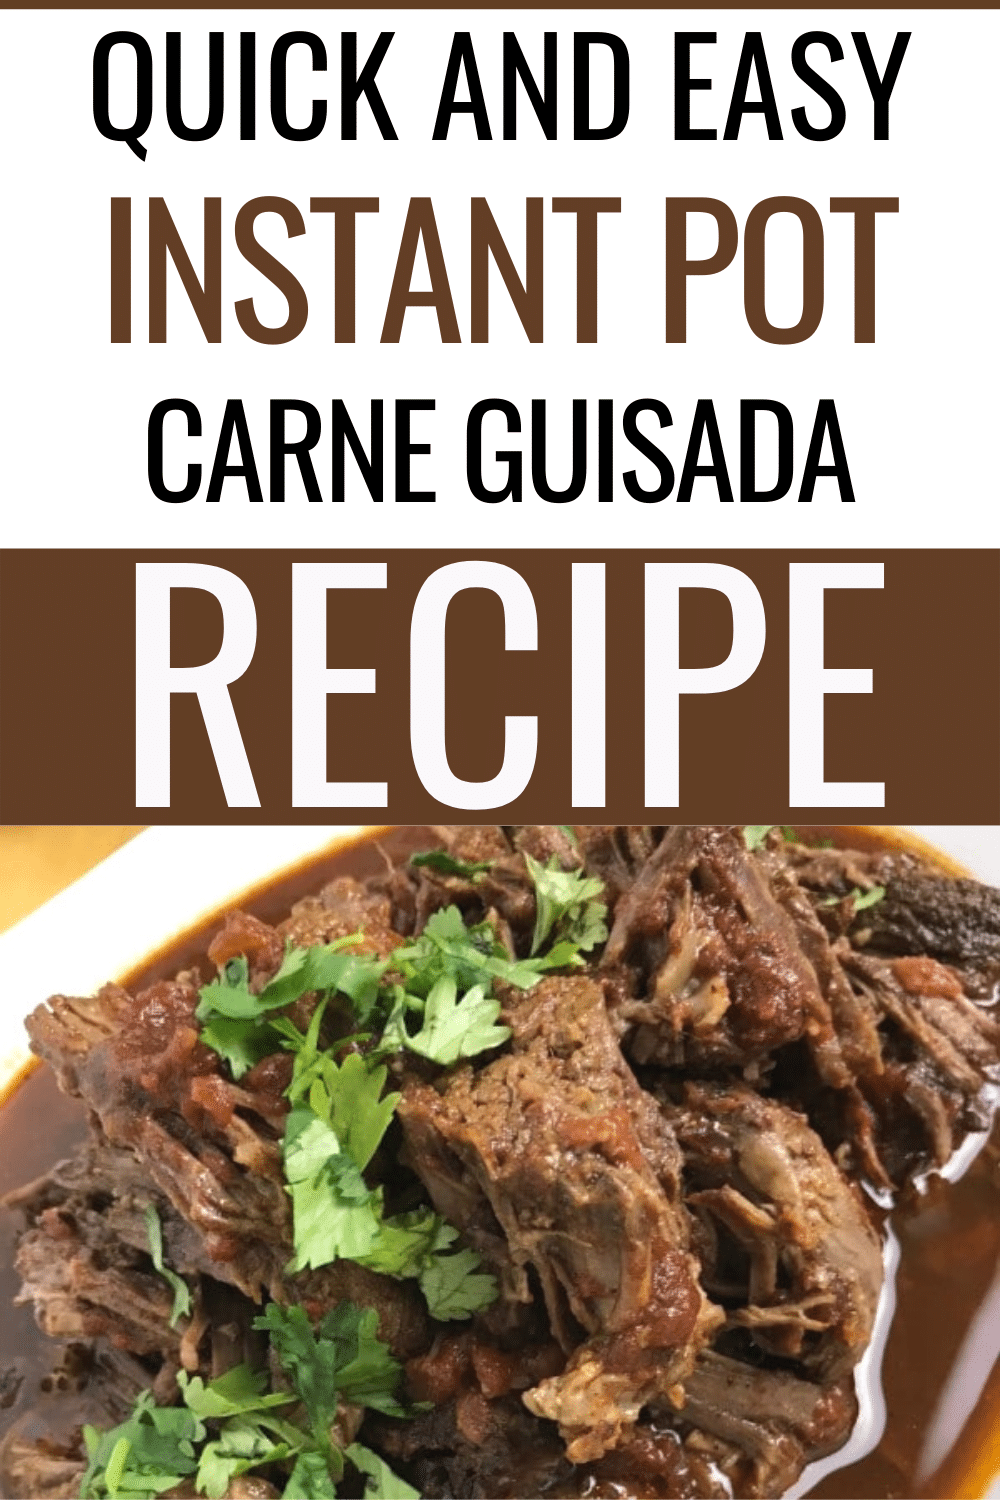 This Instant Pot Carne Guisada is so yummy right out of the bowl, but also makes an amazing taco filling. The meat comes out really juicy and tender! #instantpot #pressurecooker #Mexicanrecipes #beef #wondermomwannabe via @wondermomwannab